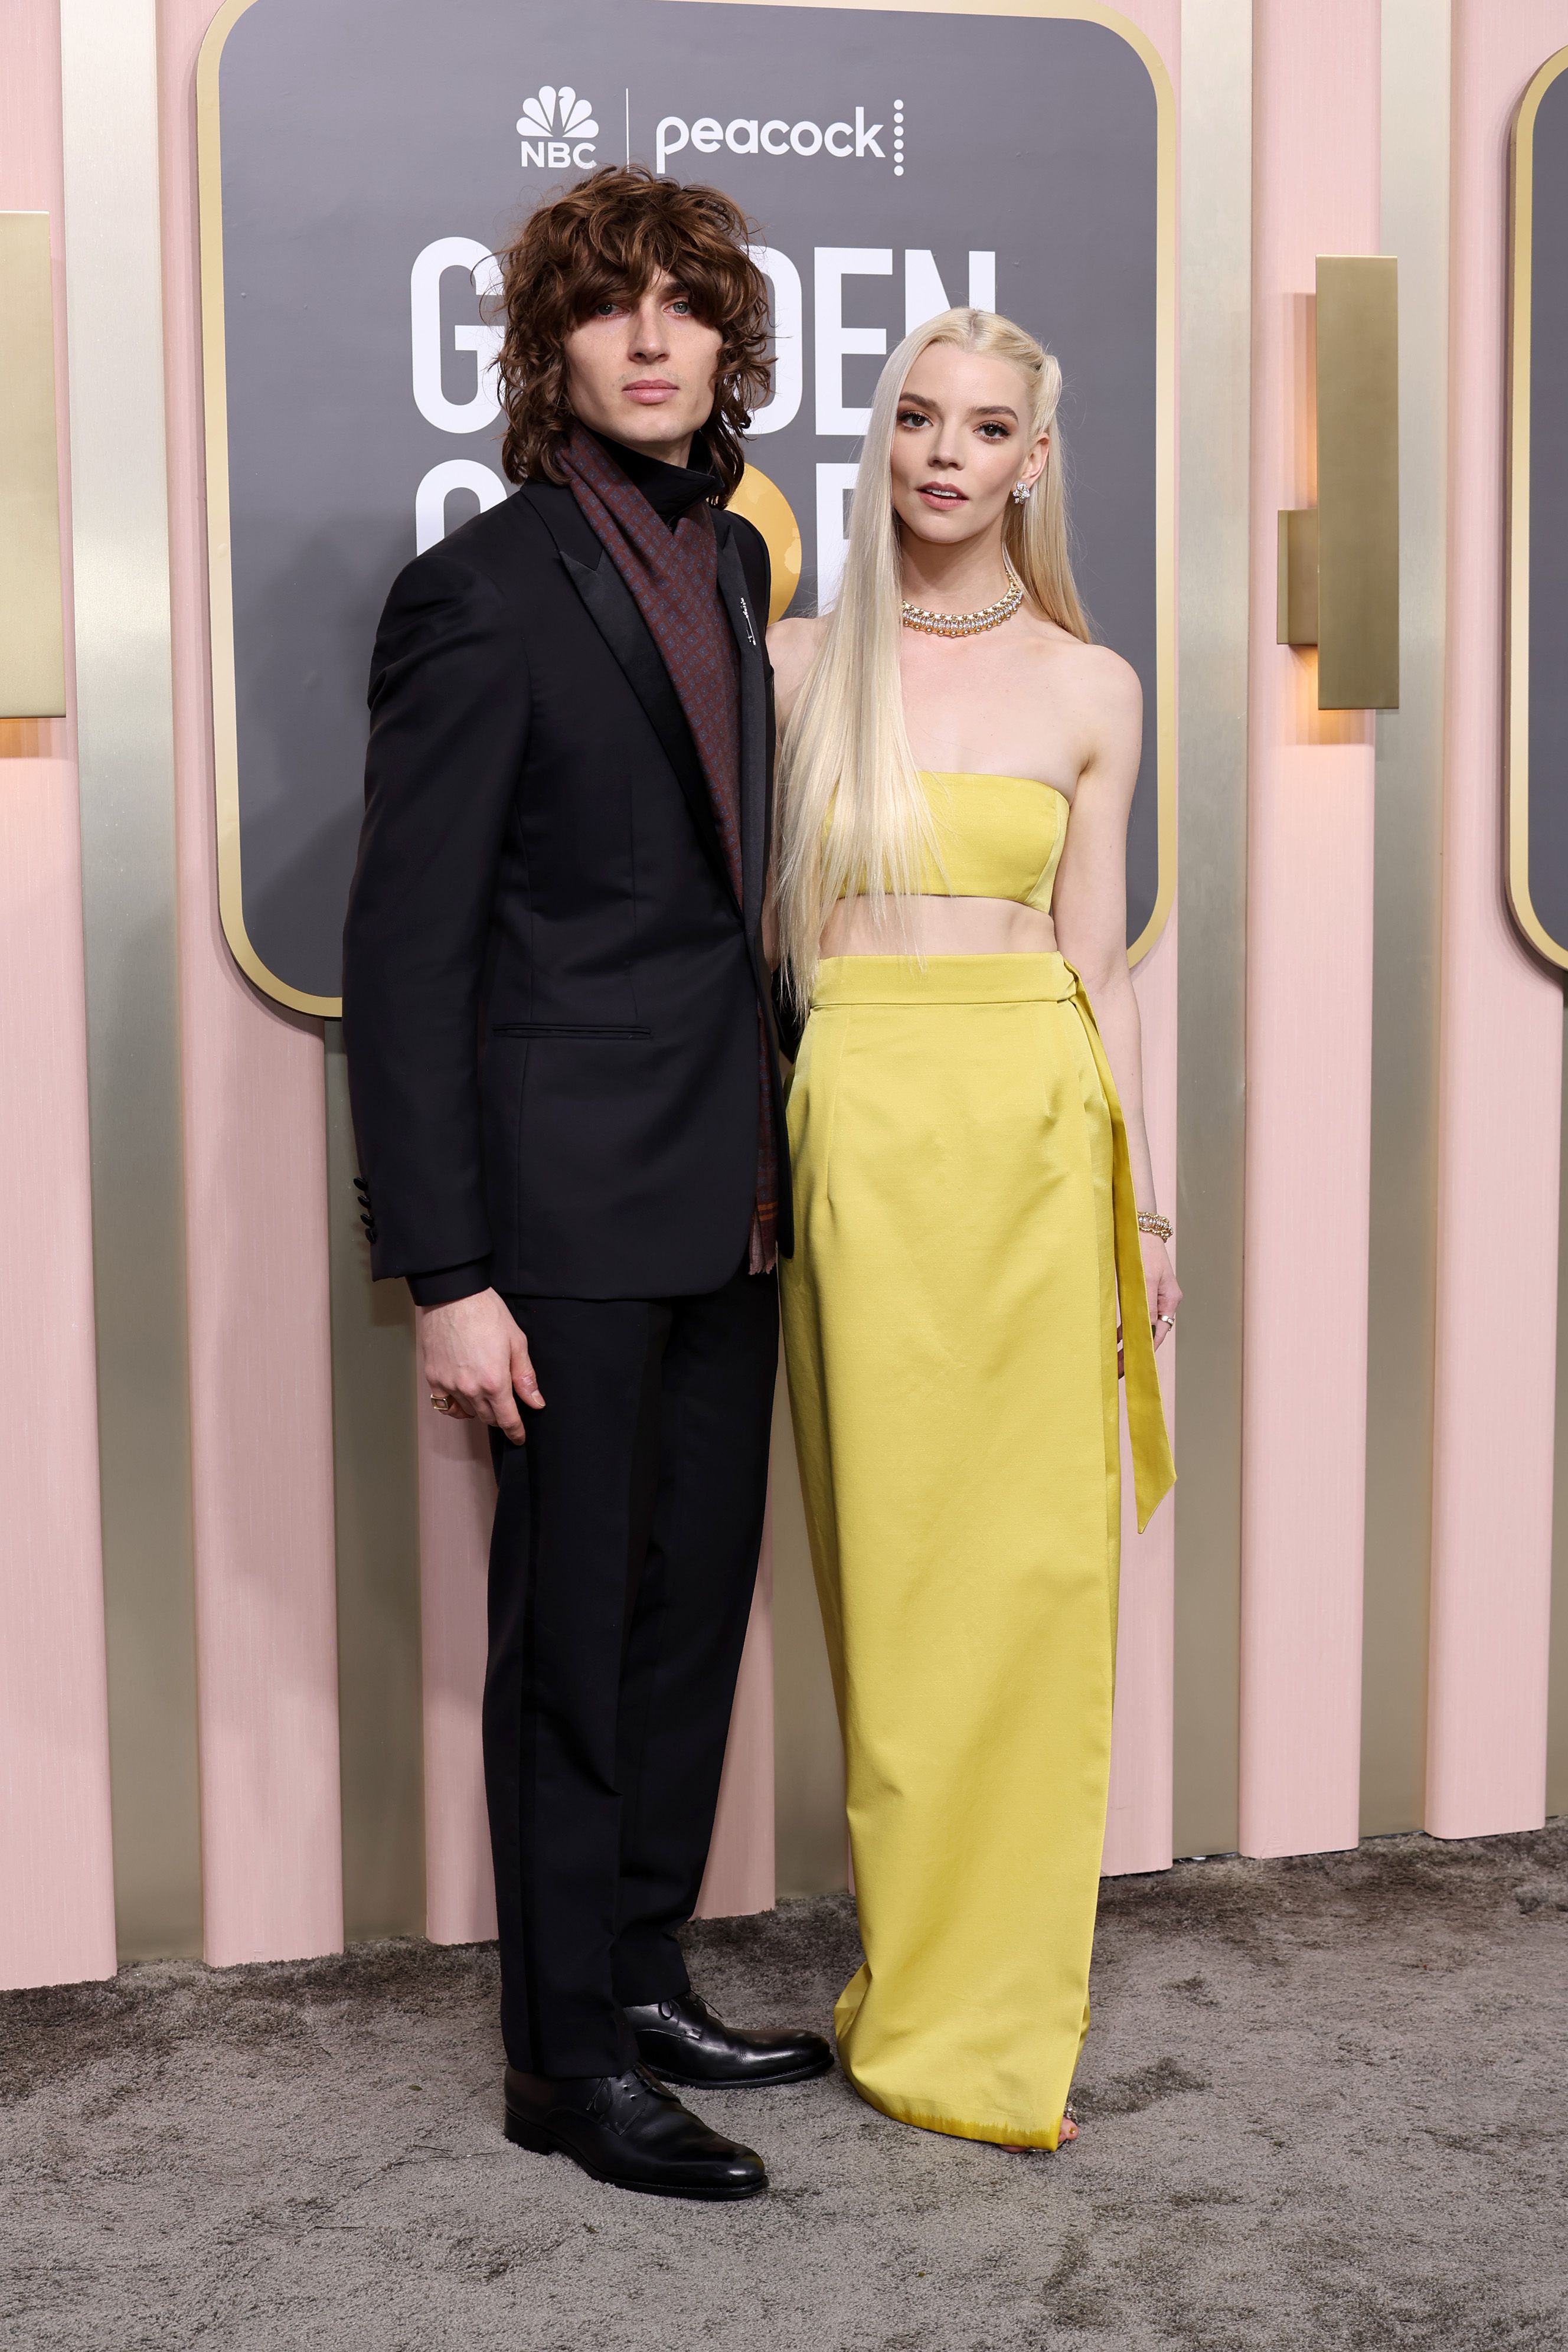 Anya Taylor-Joy's Emmys Fashion Game Is on Point With Bold Yellow Gown